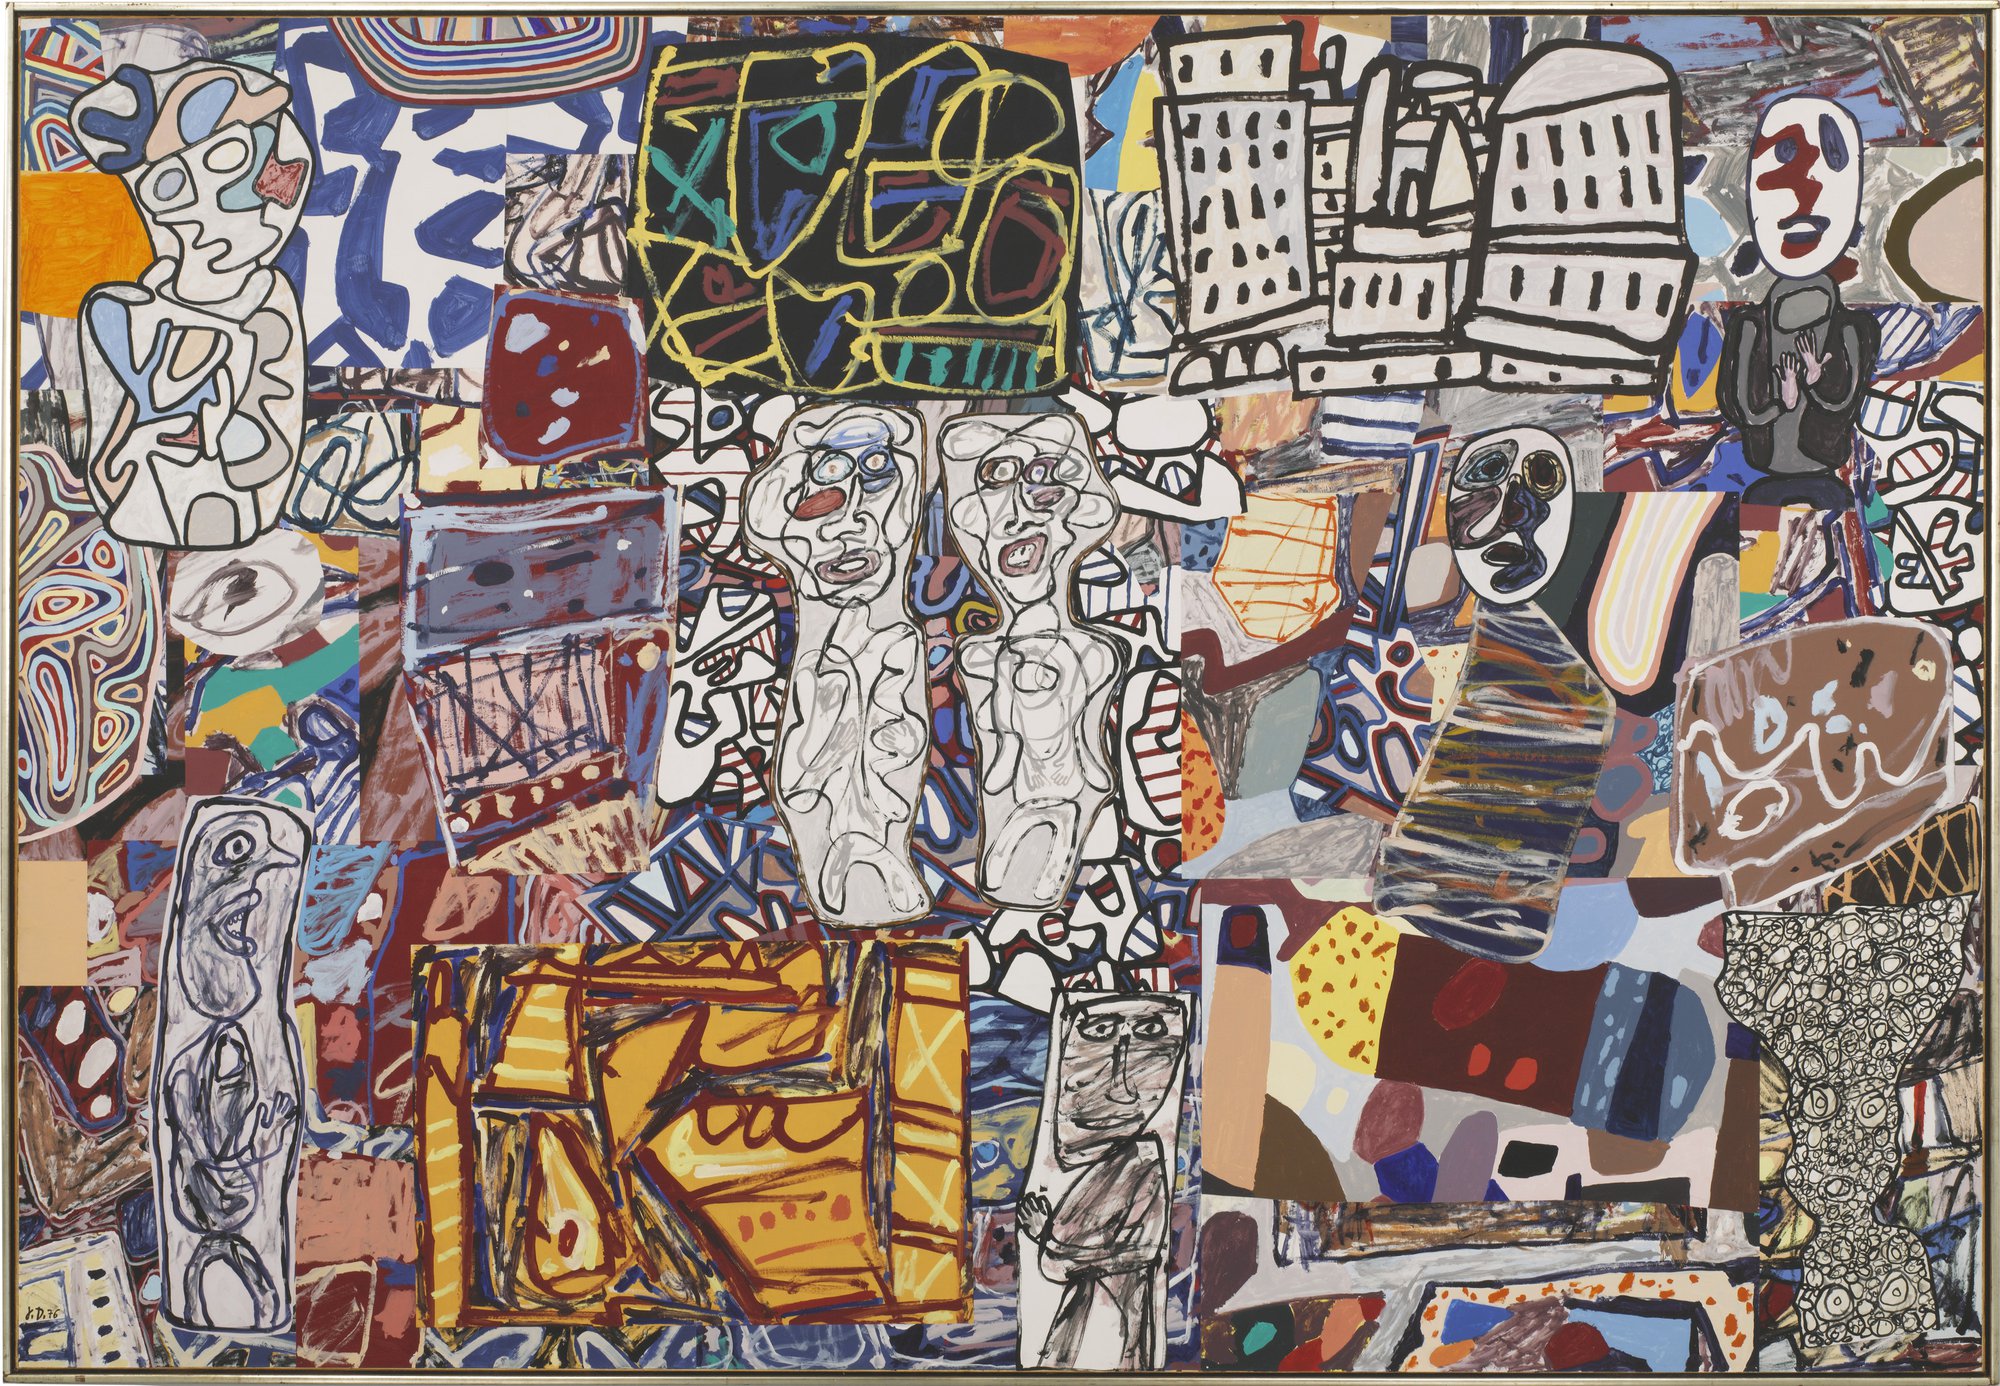 JEAN DUBUFFET Simulacres SET OF 10 7.75" x 5.75" Serigraph 1974 Outsider Art 